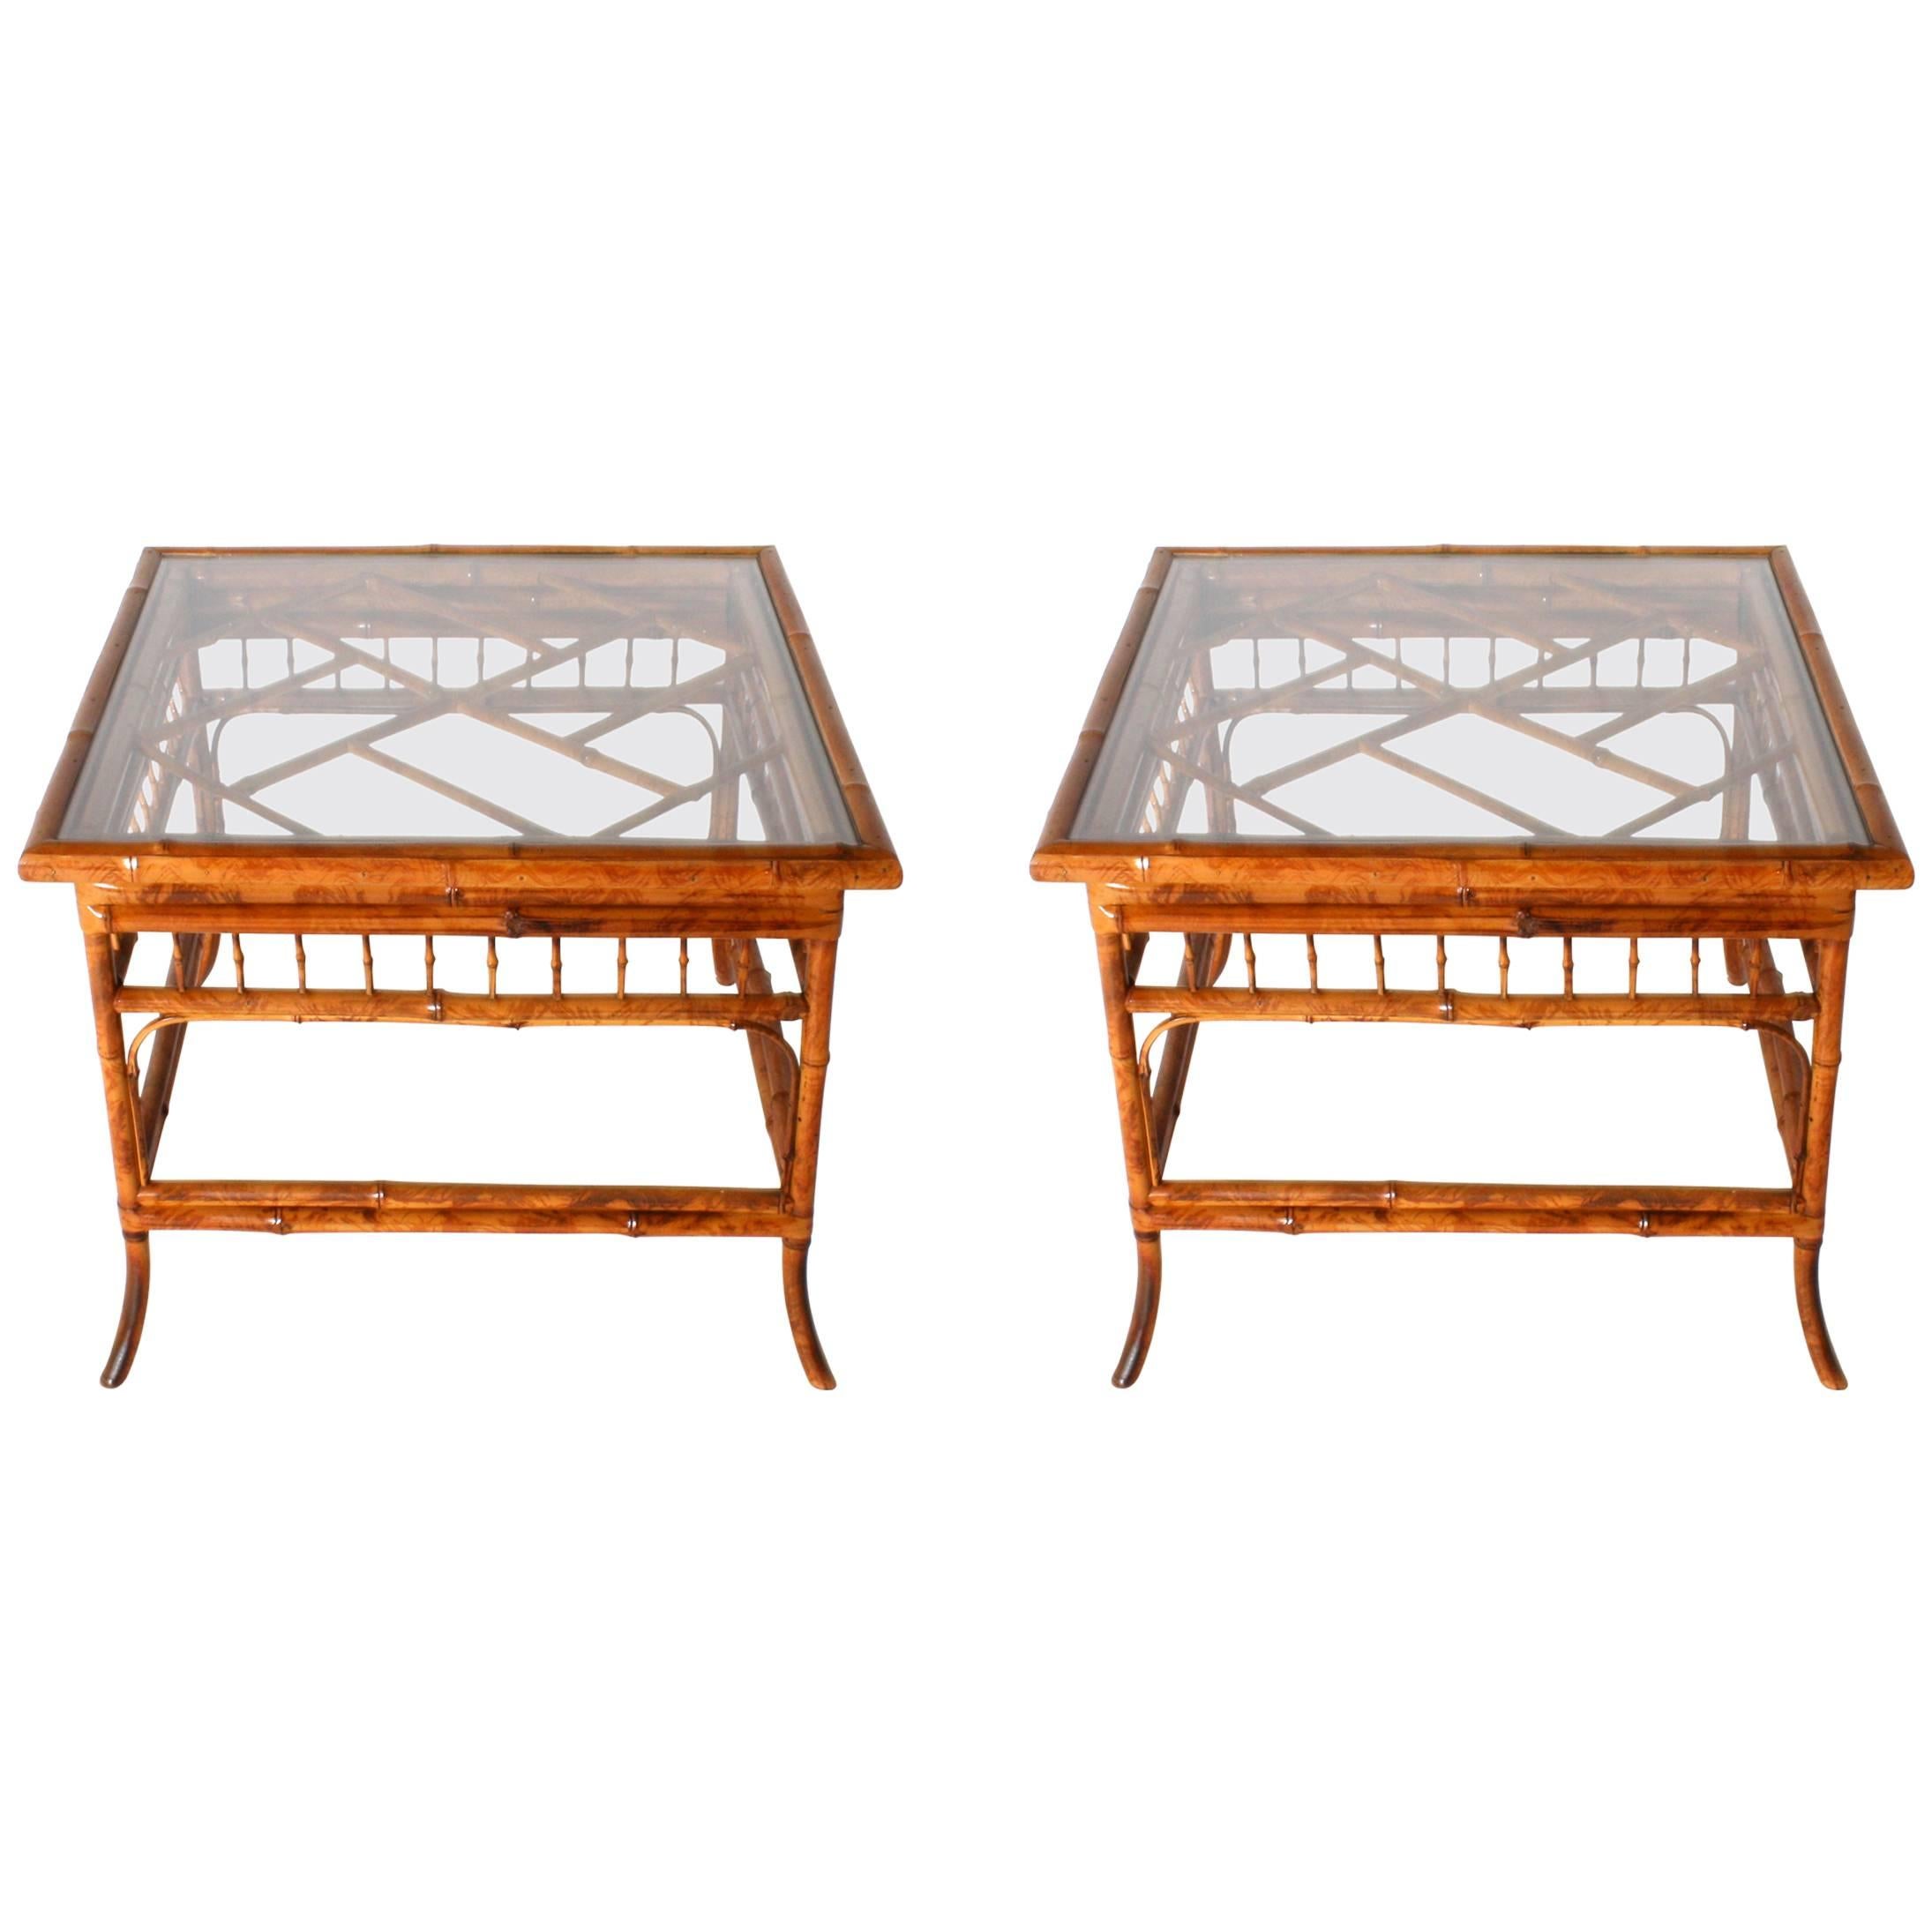 Pair of Bamboo Side Tables, circa 1970